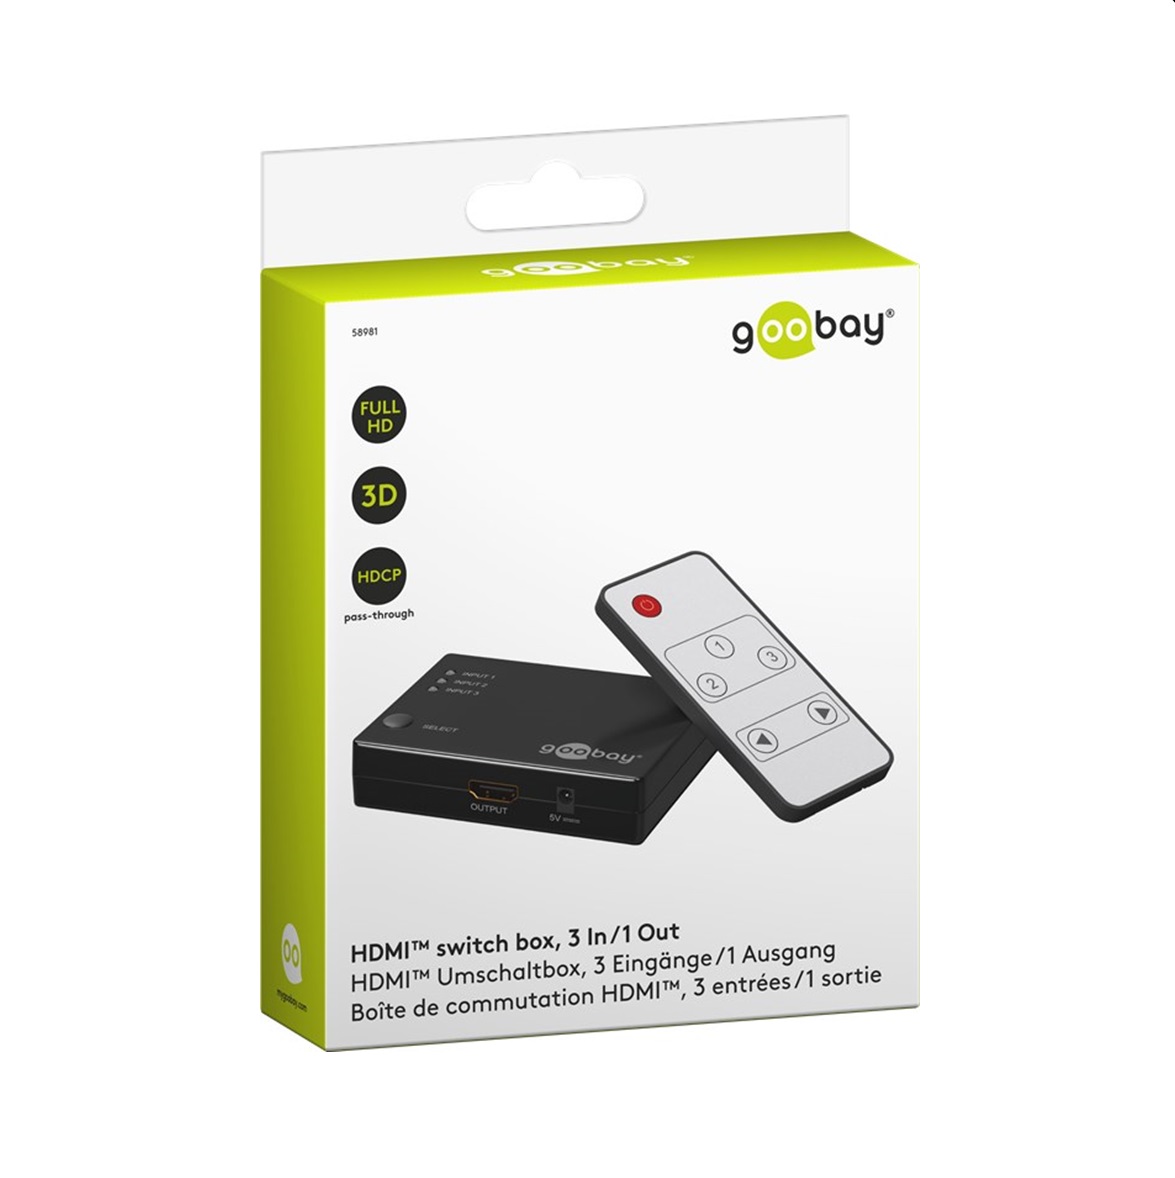 HDMI Switch 3 to 1  GOOBAY 58981